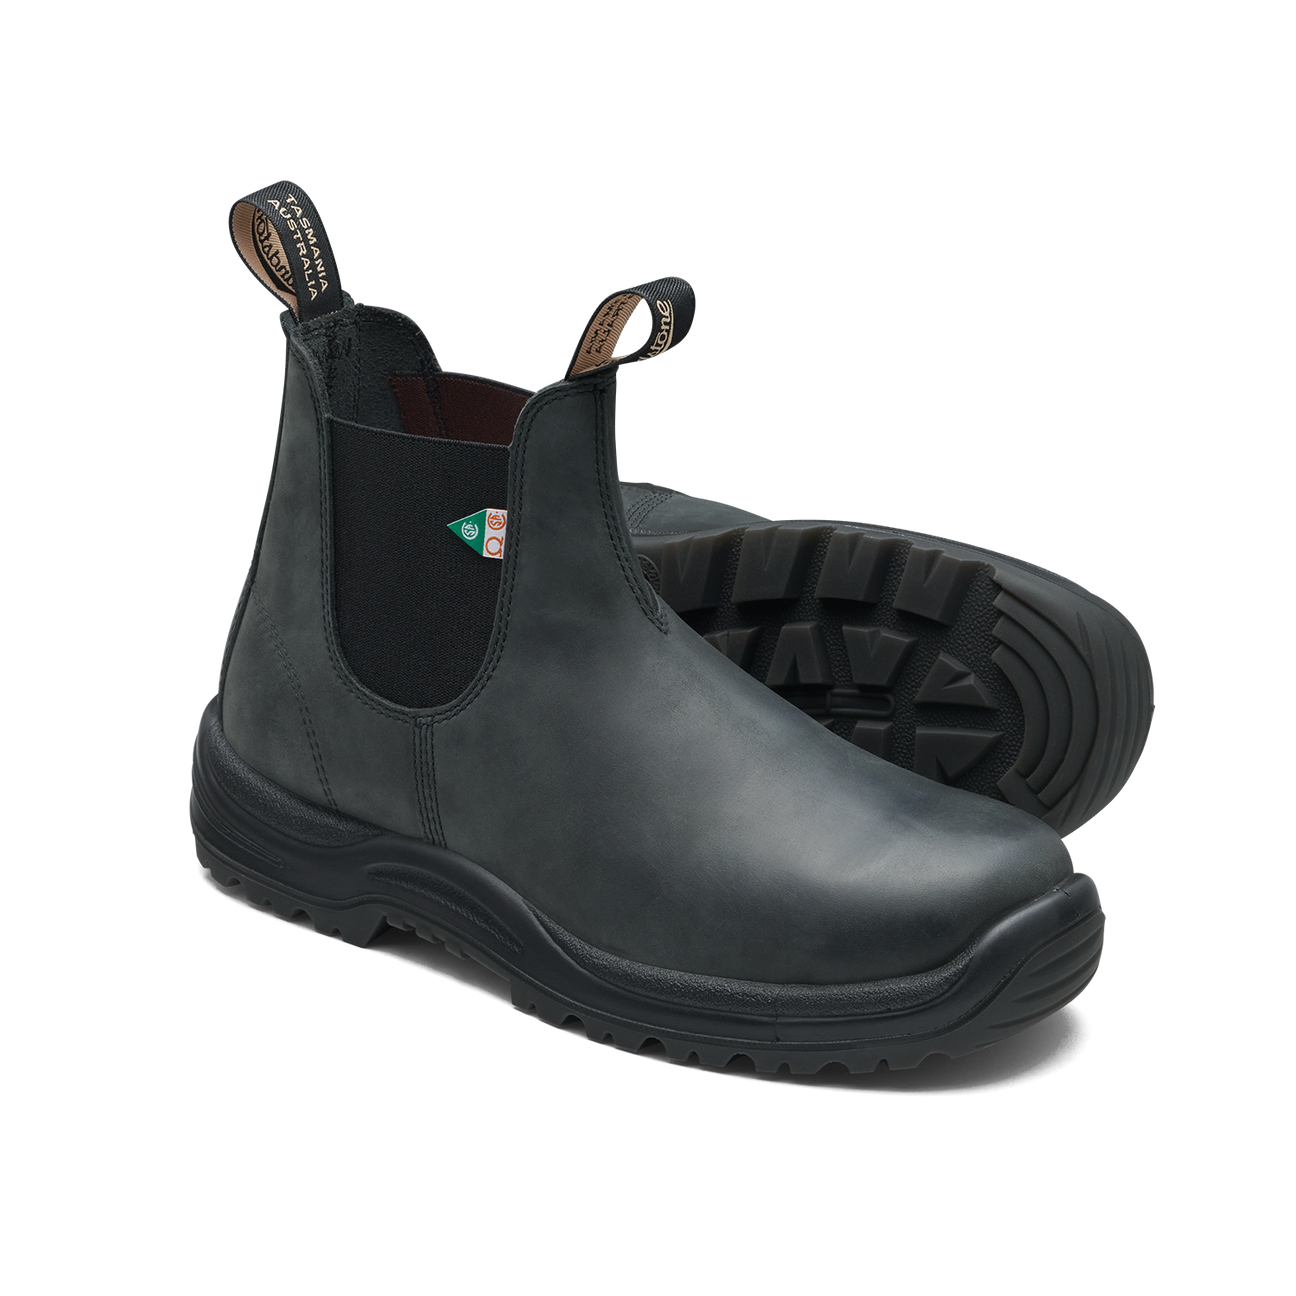 Blundstone 181 Work & Safety Boot - Waxy Rustic Black